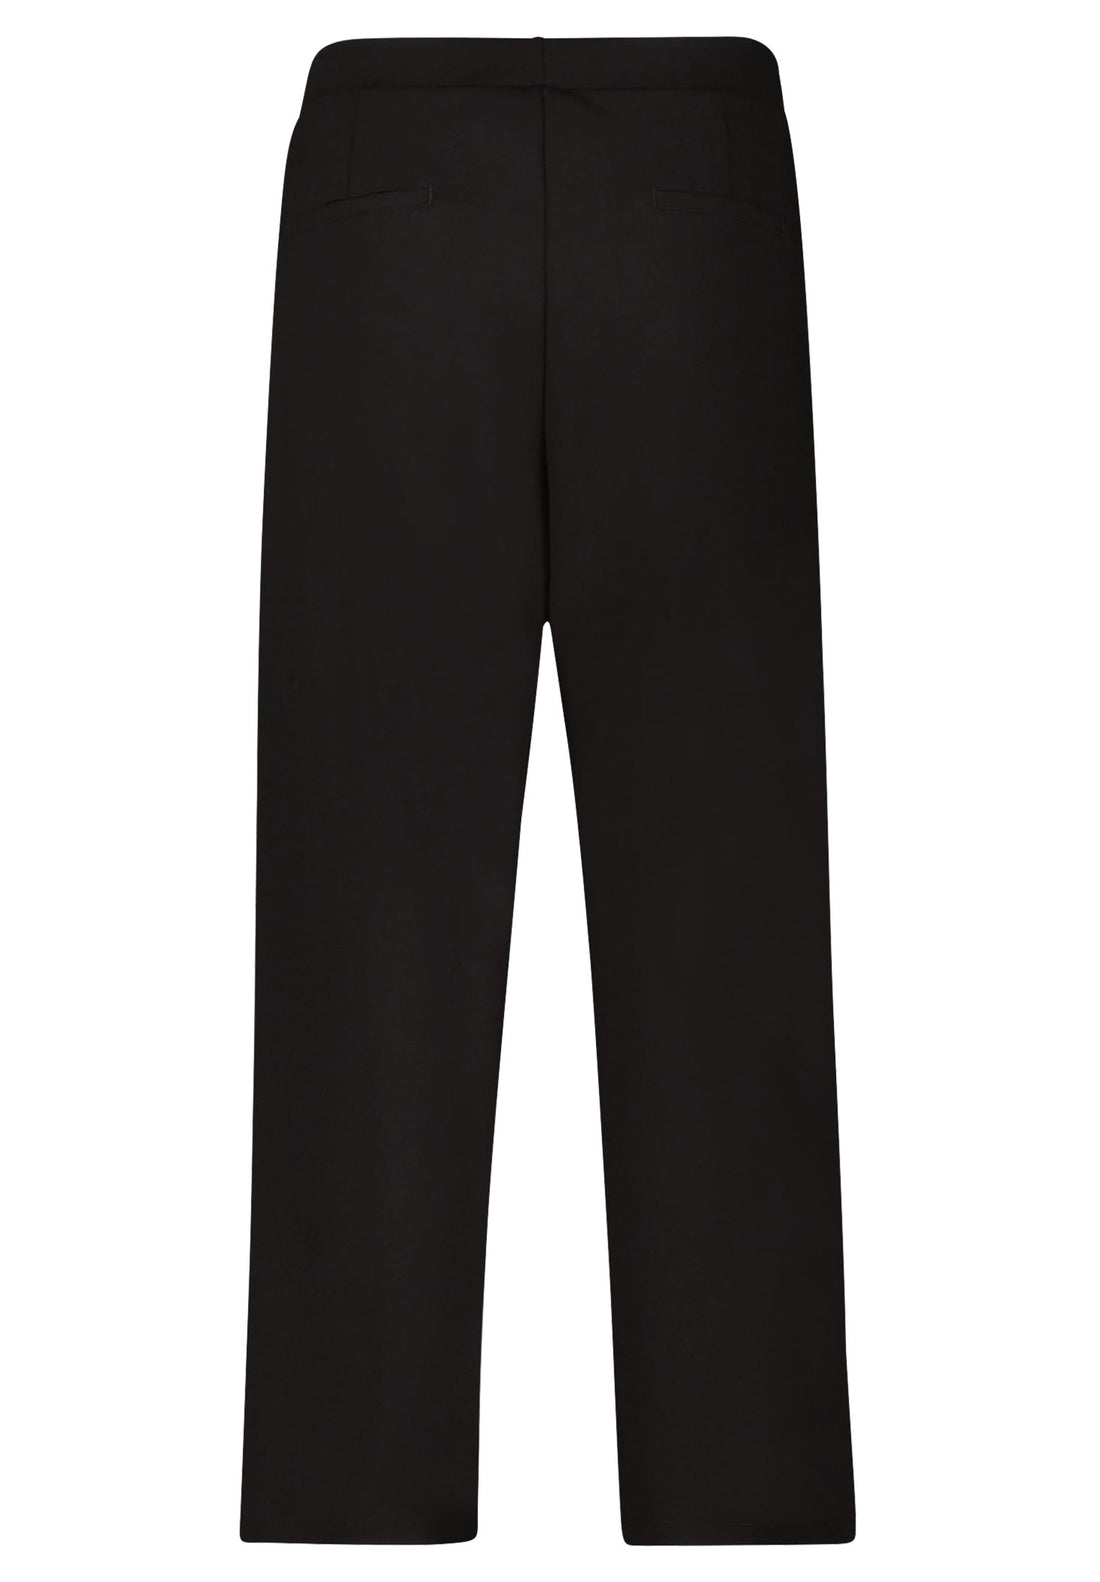 Black Cropped Slip On Trousers_6822-2250_9045_02